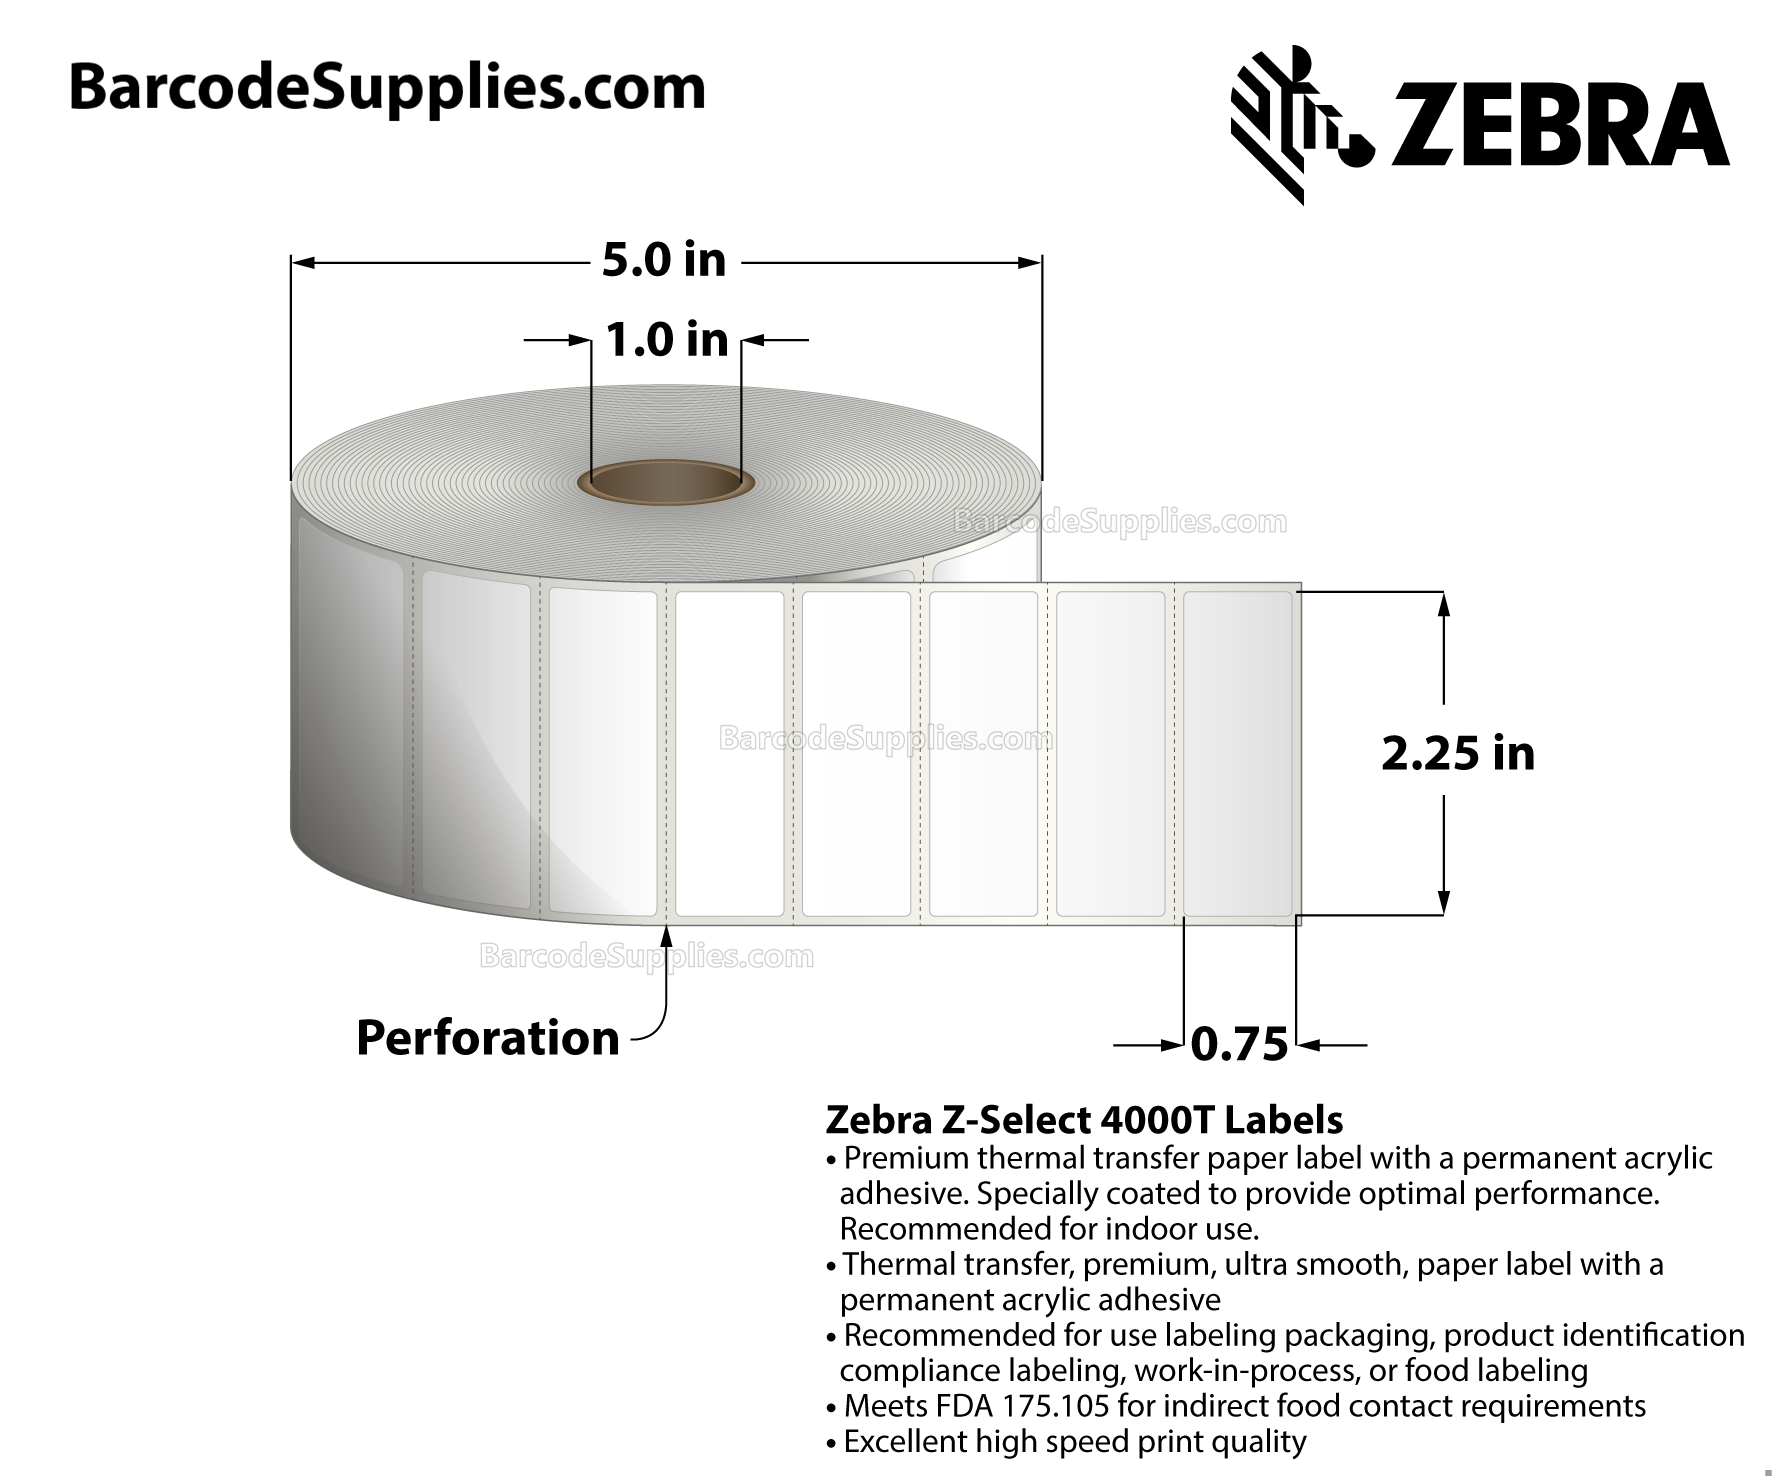 2.25 x 0.75 Thermal Transfer White Z-Select 4000T Labels With Permanent Adhesive - Perforated - 3320 Labels Per Roll - Carton Of 6 Rolls - 19920 Labels Total - MPN: 10009524